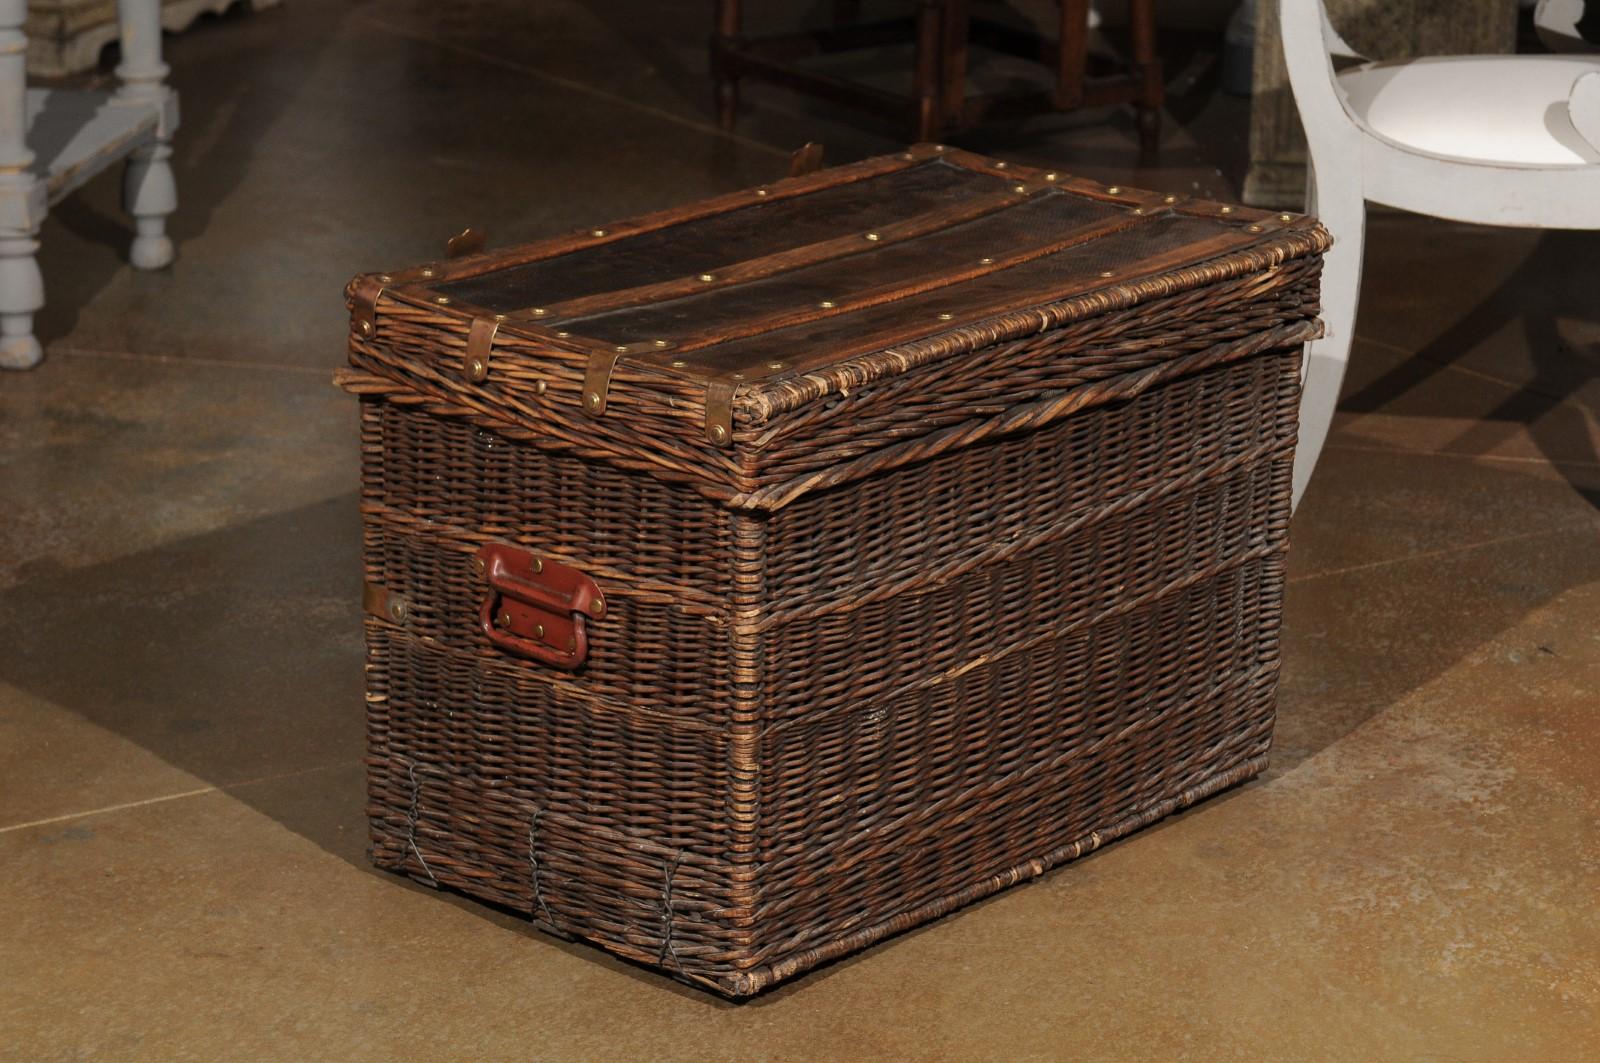 Painted French 19th Century Rustic Wicker Trunk with Brass Hardware and Red Handles